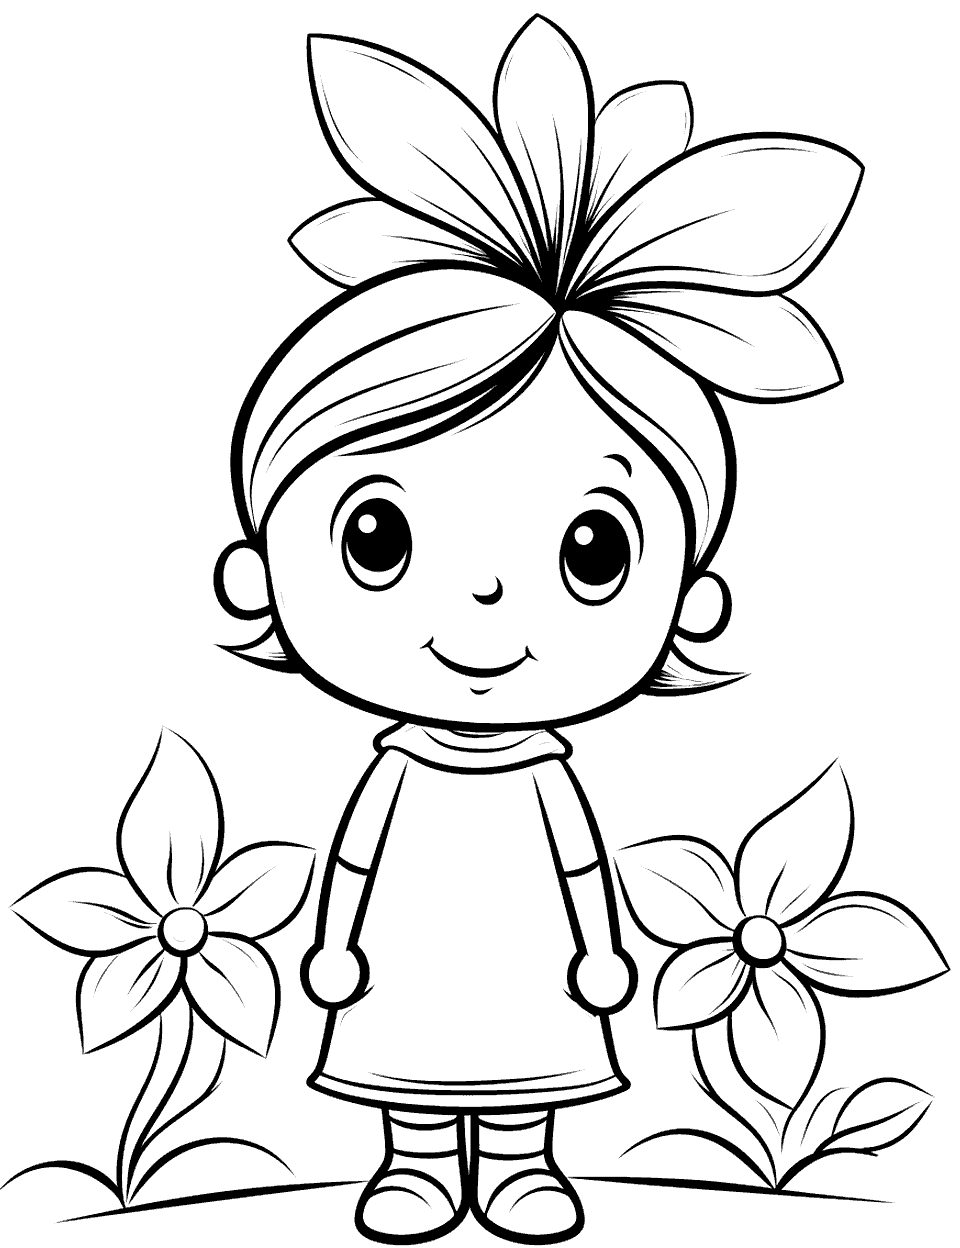 Flower Tribe Girl Coloring Page - A flower tribe girl in her native clothes.